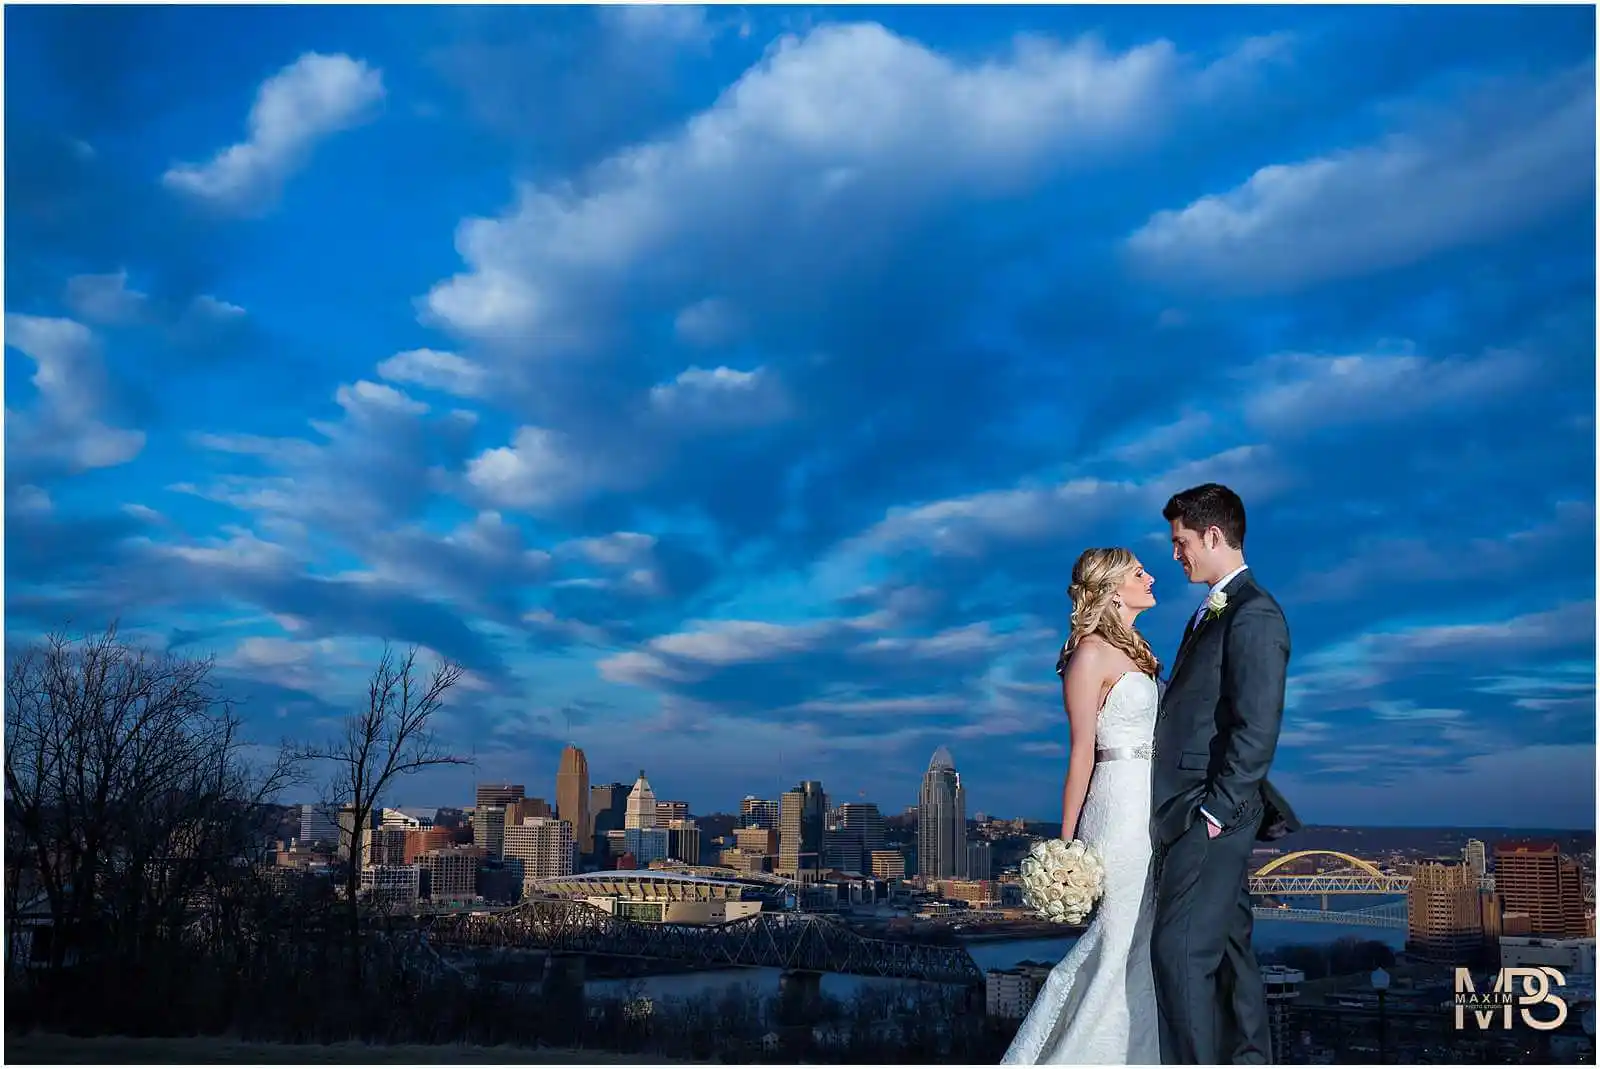 Newlyweds sharing a moment with a striking cityscape in Covington, KY.